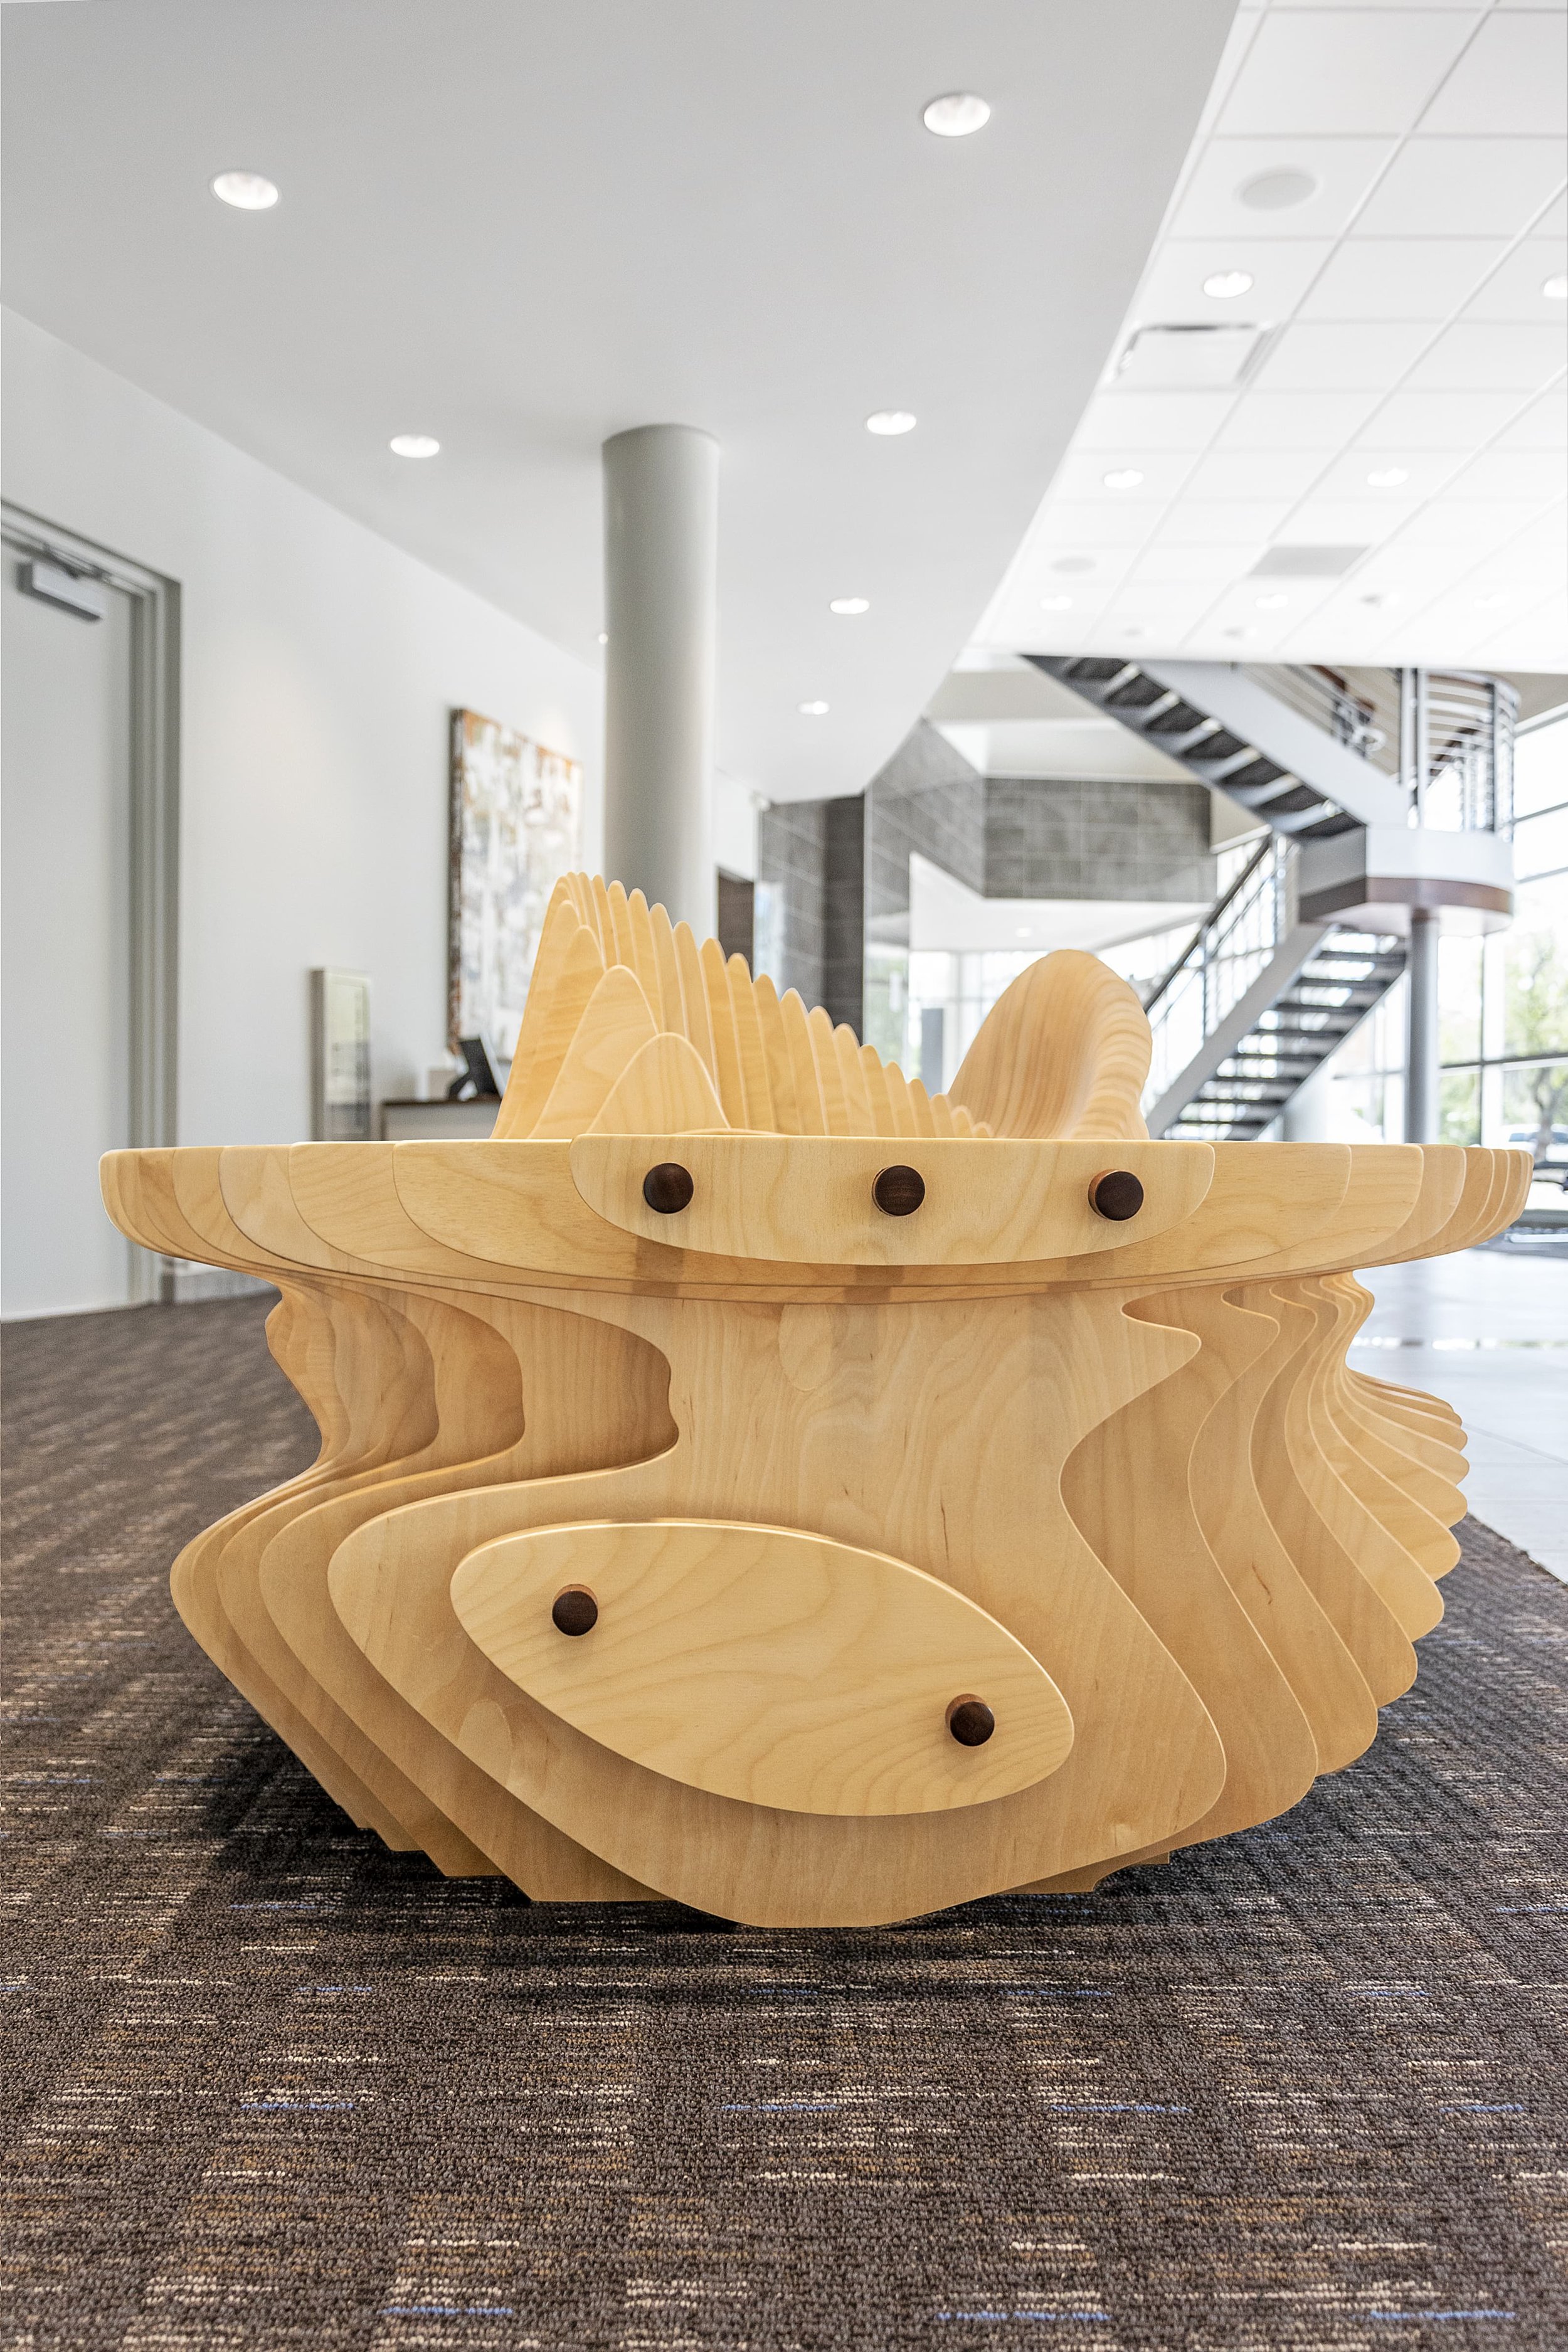 Parametric CNC Bench in Sabal Palm Bank Lobby - side view